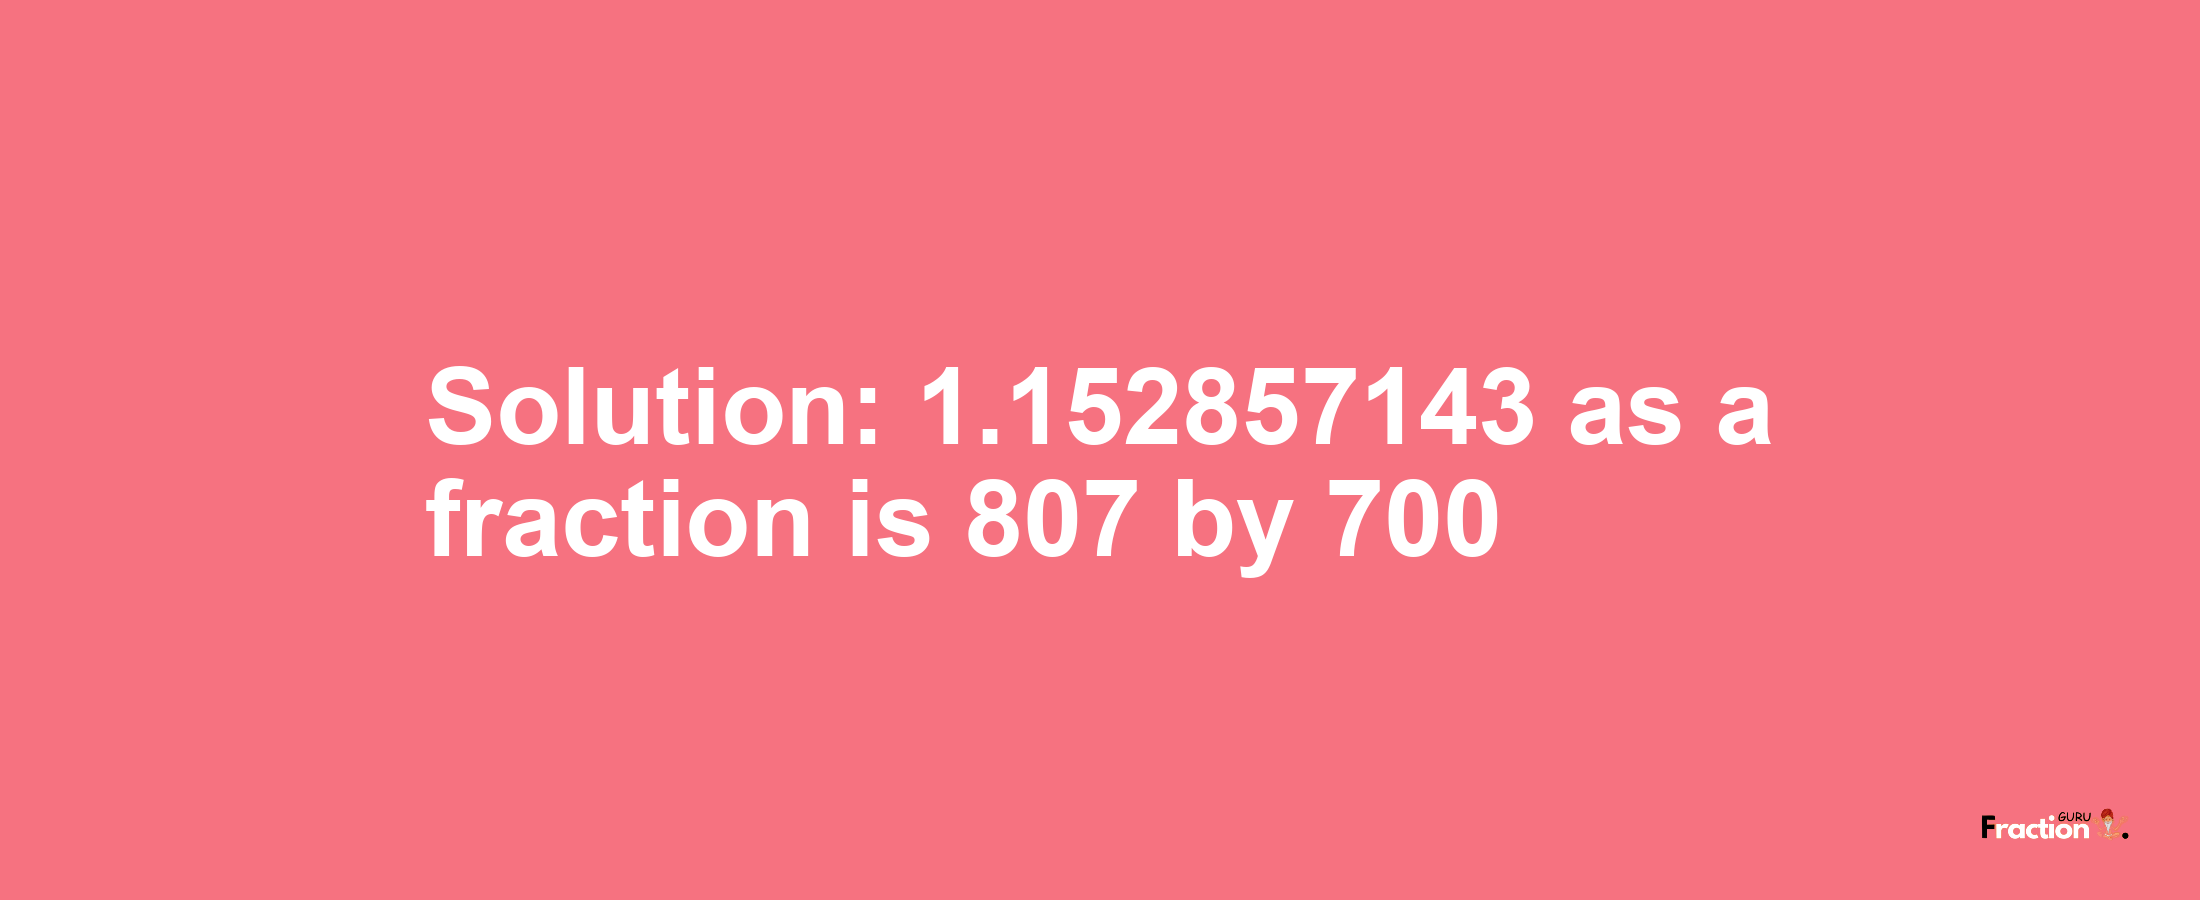 Solution:1.152857143 as a fraction is 807/700